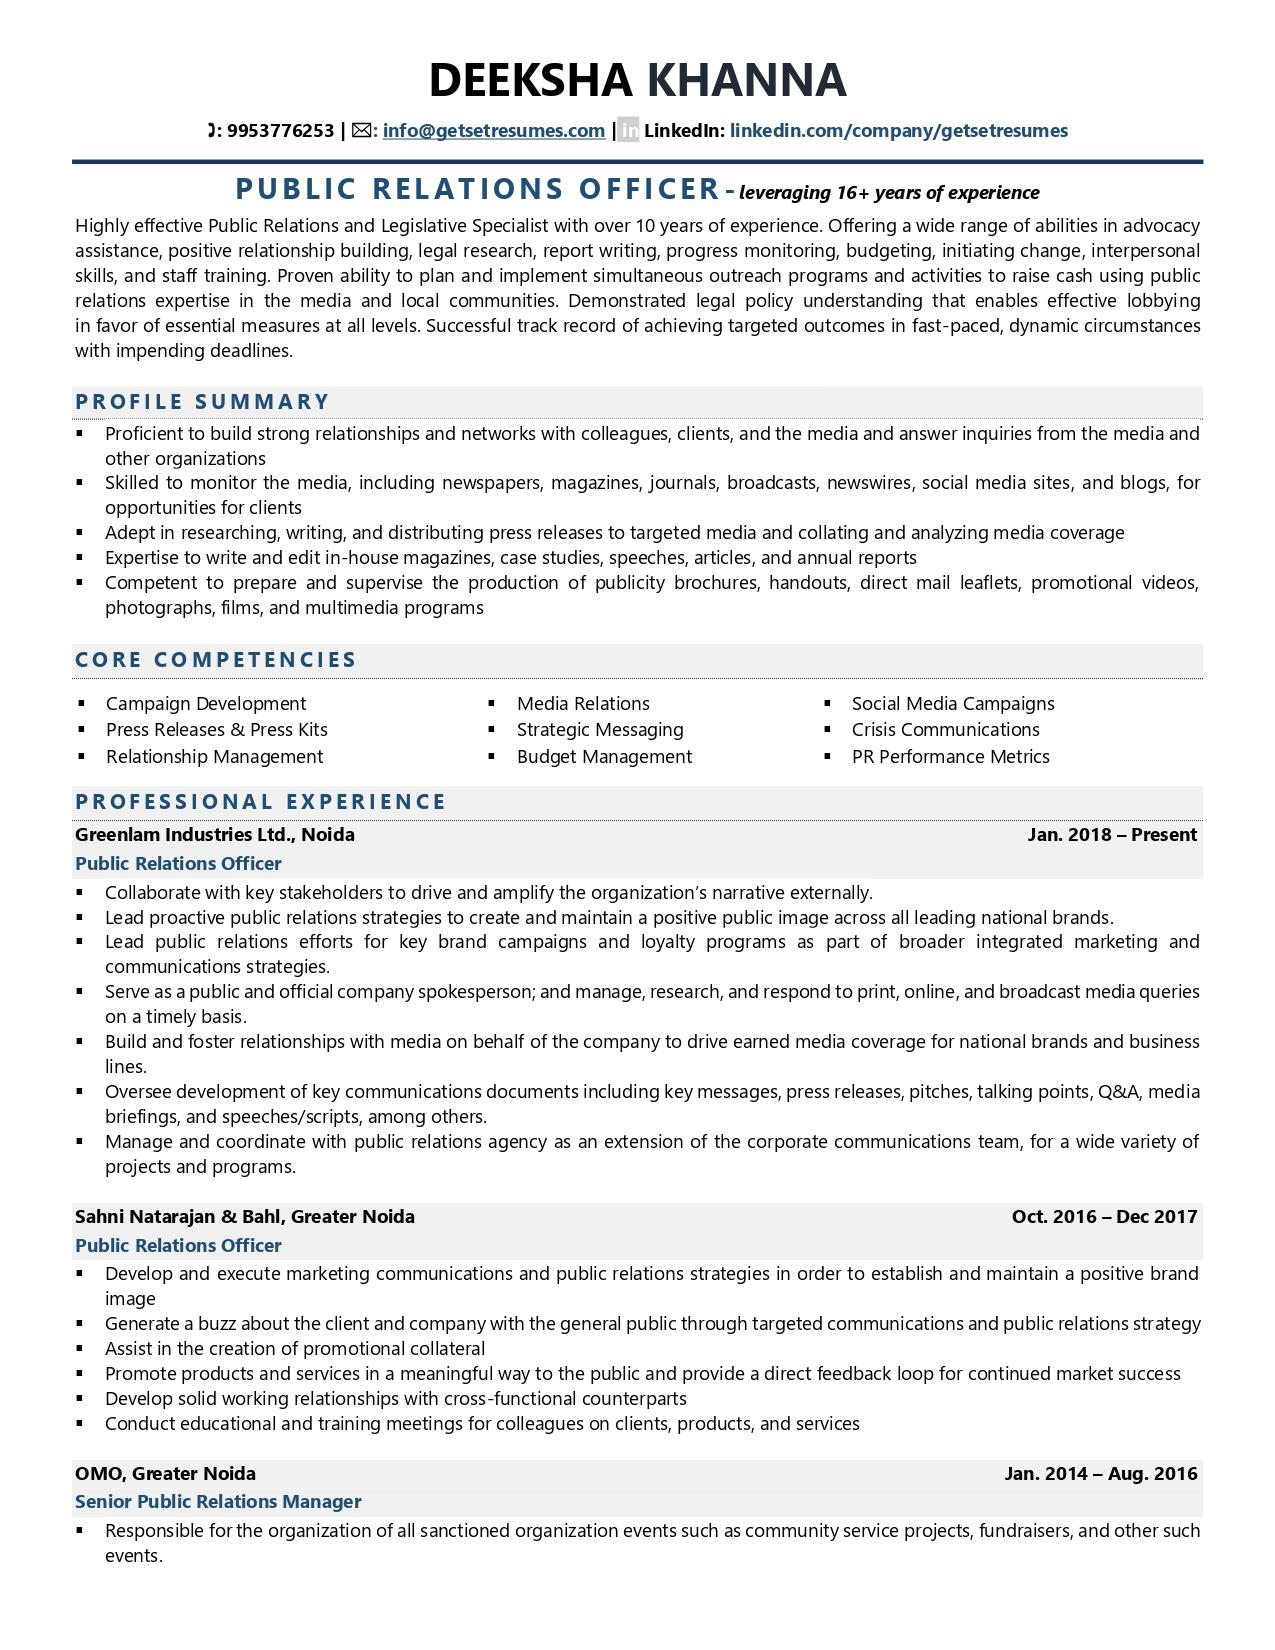 Public Relations Officer - Resume Example & Template